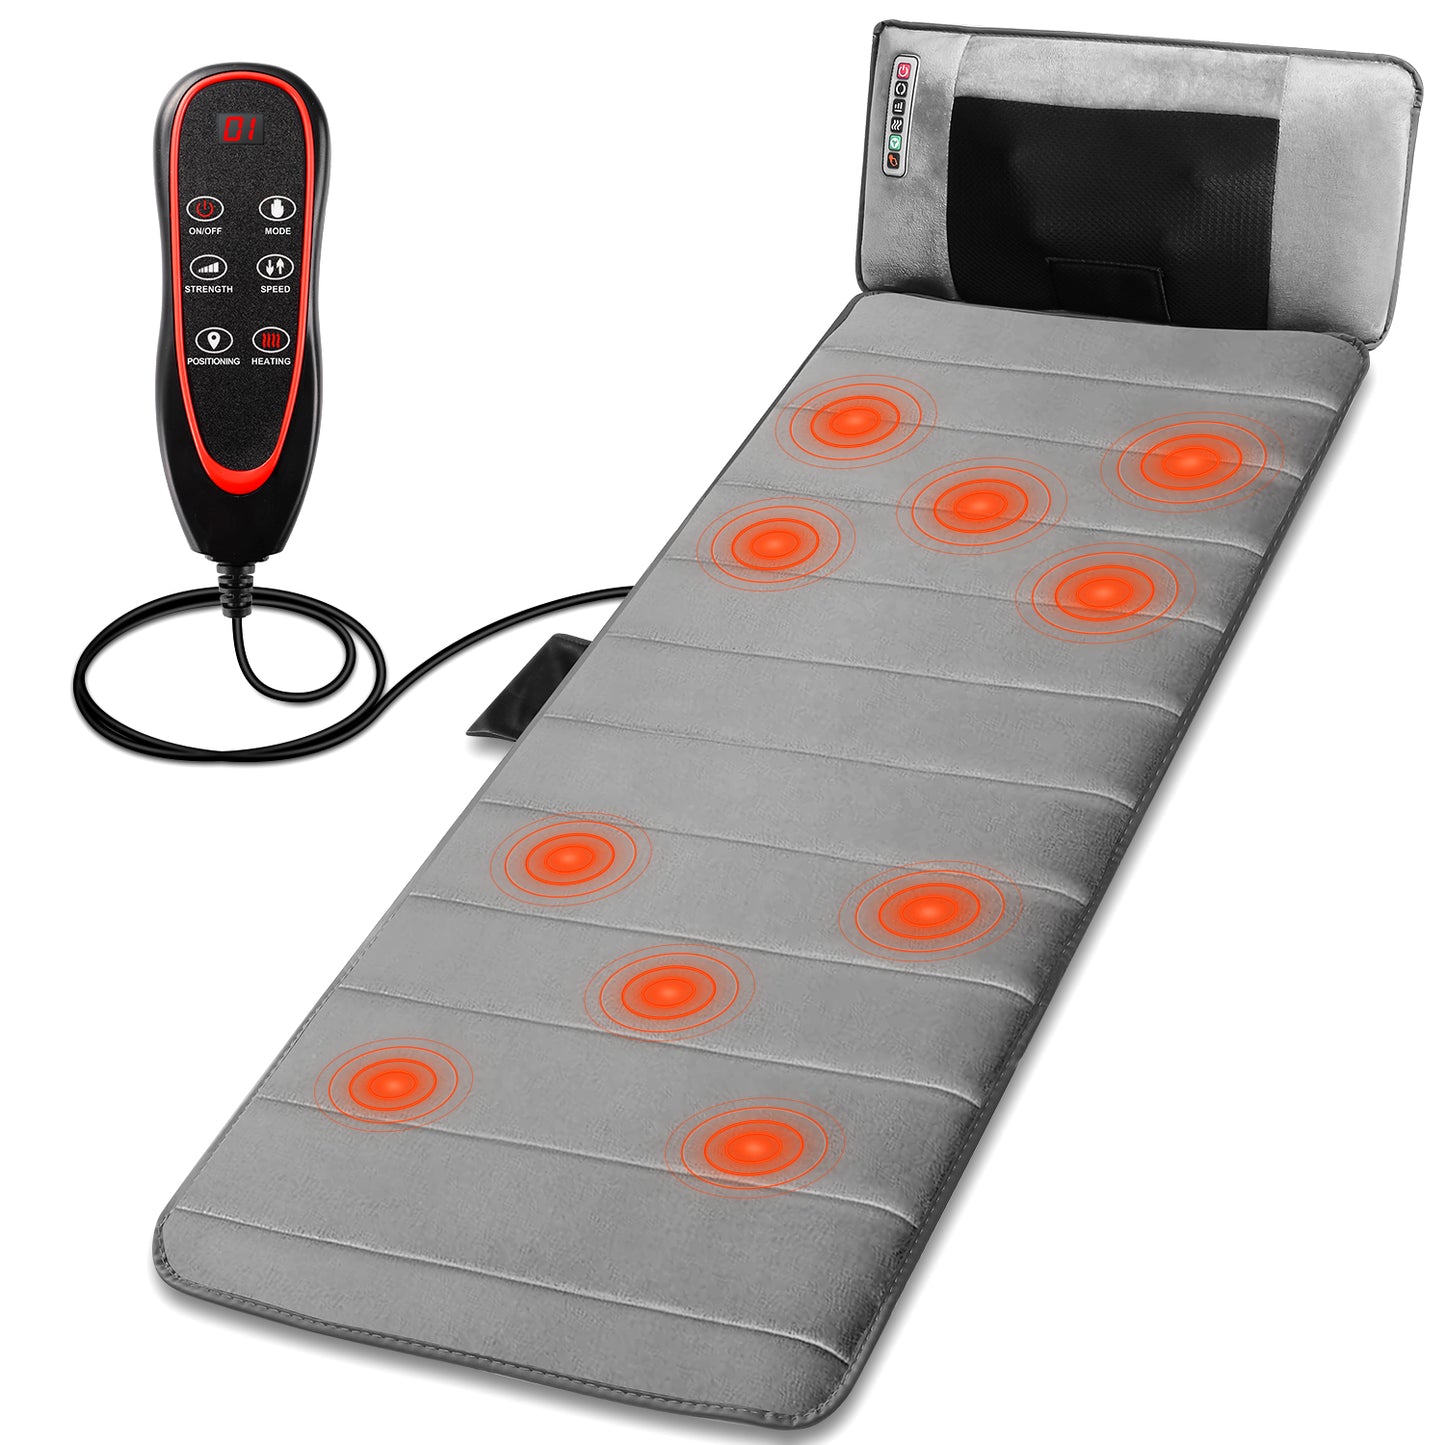 Flannel heating massage cushion for improving sleep and relieving pain and fatigue OT291